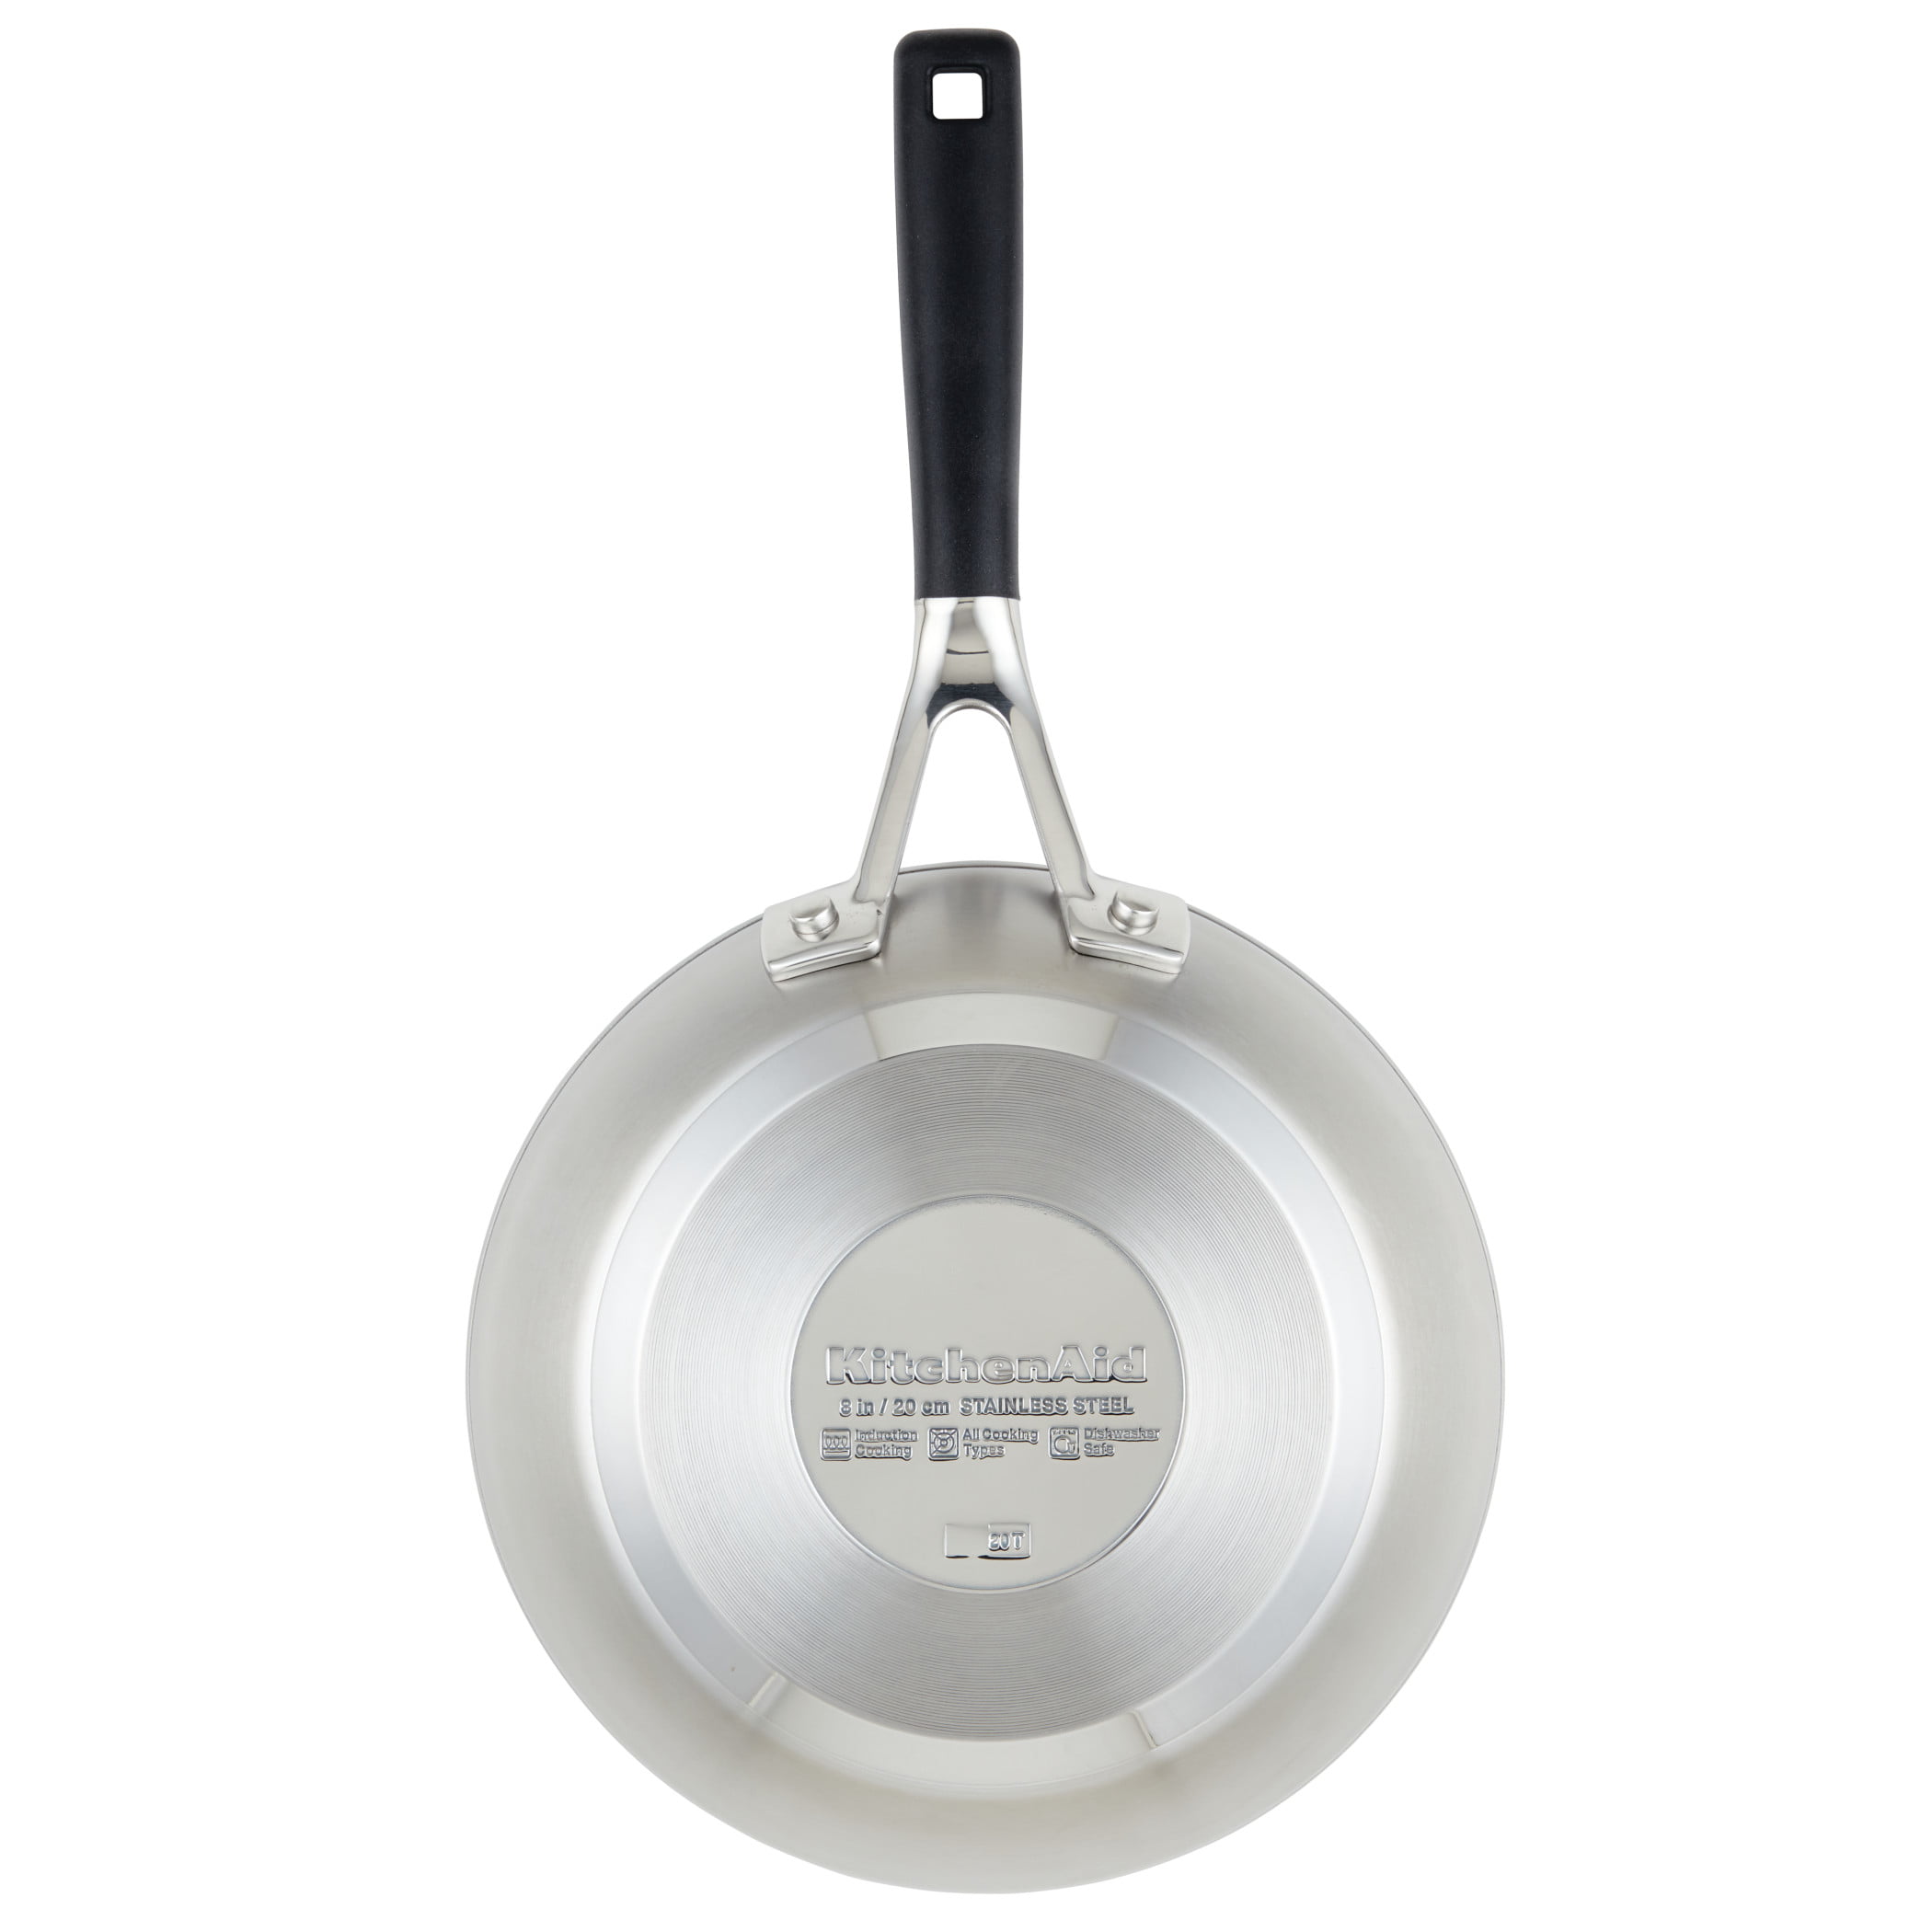 9-inch Fry Pan Induction Stainless Steel Made in the USA – Health Craft